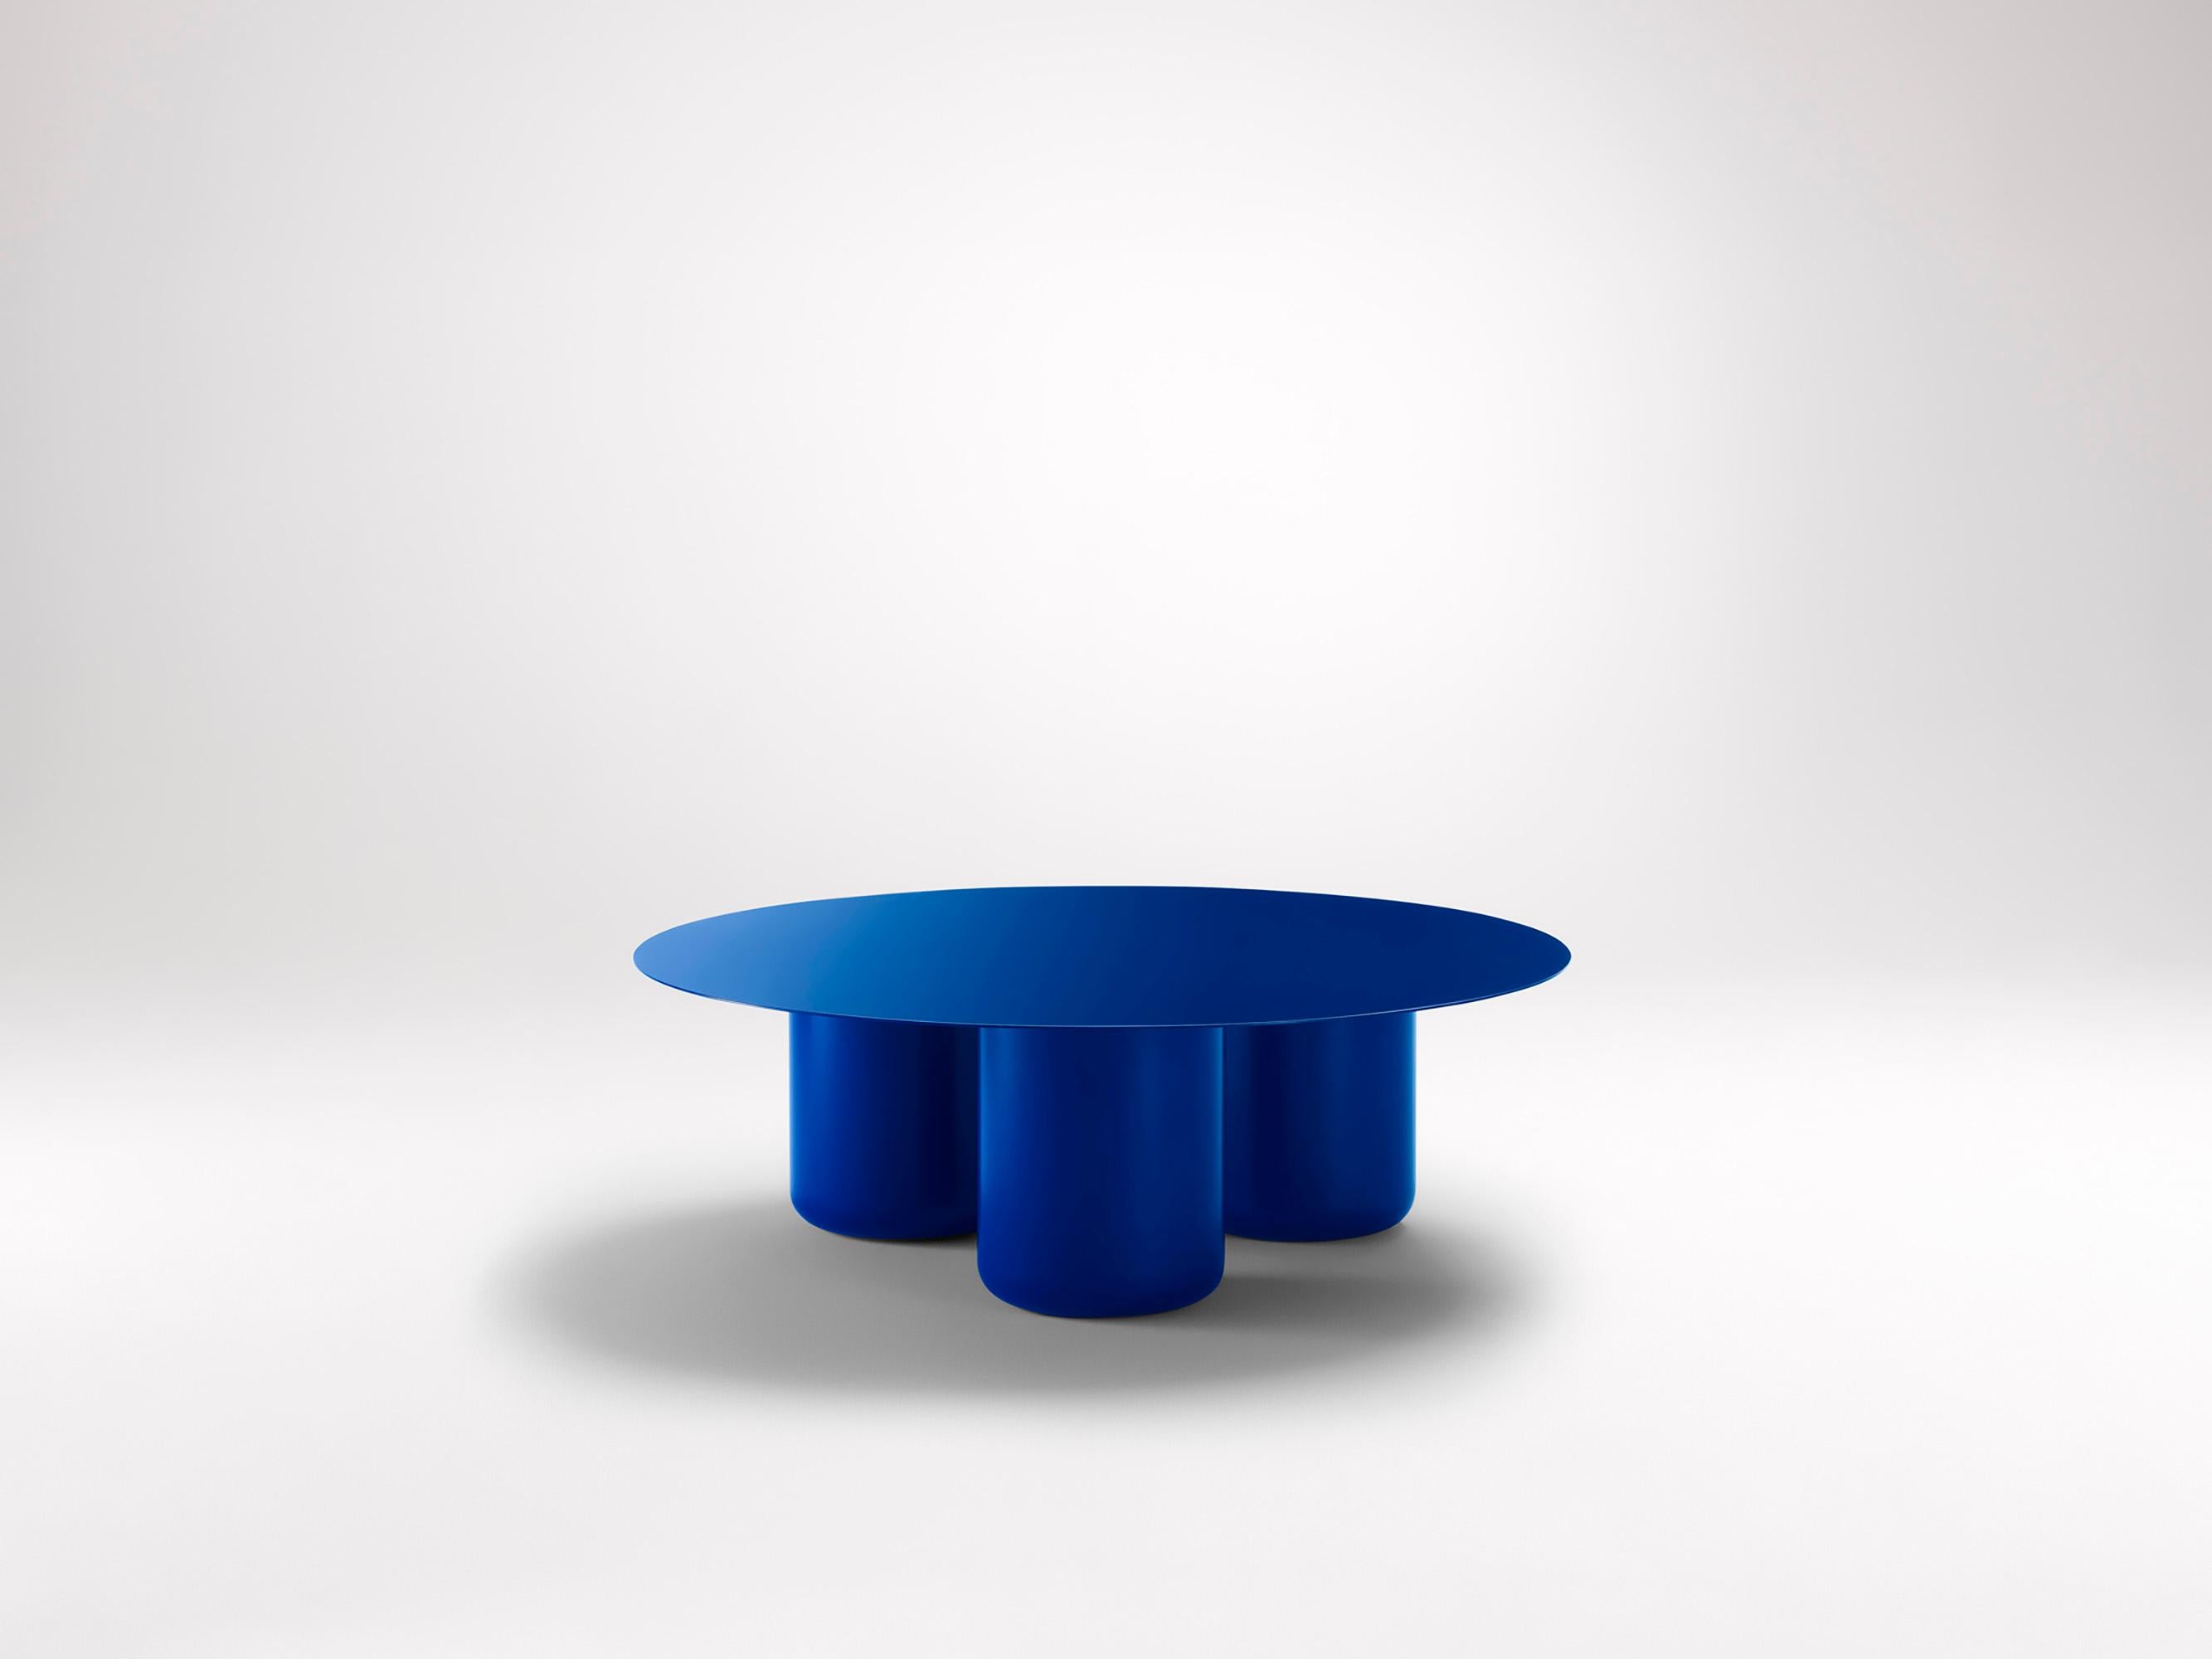 Vivid Blue Round Table by Coco Flip
Dimensions: D 100 x H 32 / 36 / 40 / 42 cm
Materials: Mild steel, powder-coated with zinc undercoat. 
Weight: 34 kg

Coco Flip is a Melbourne based furniture and lighting design studio, run by us, Kate Stokes and